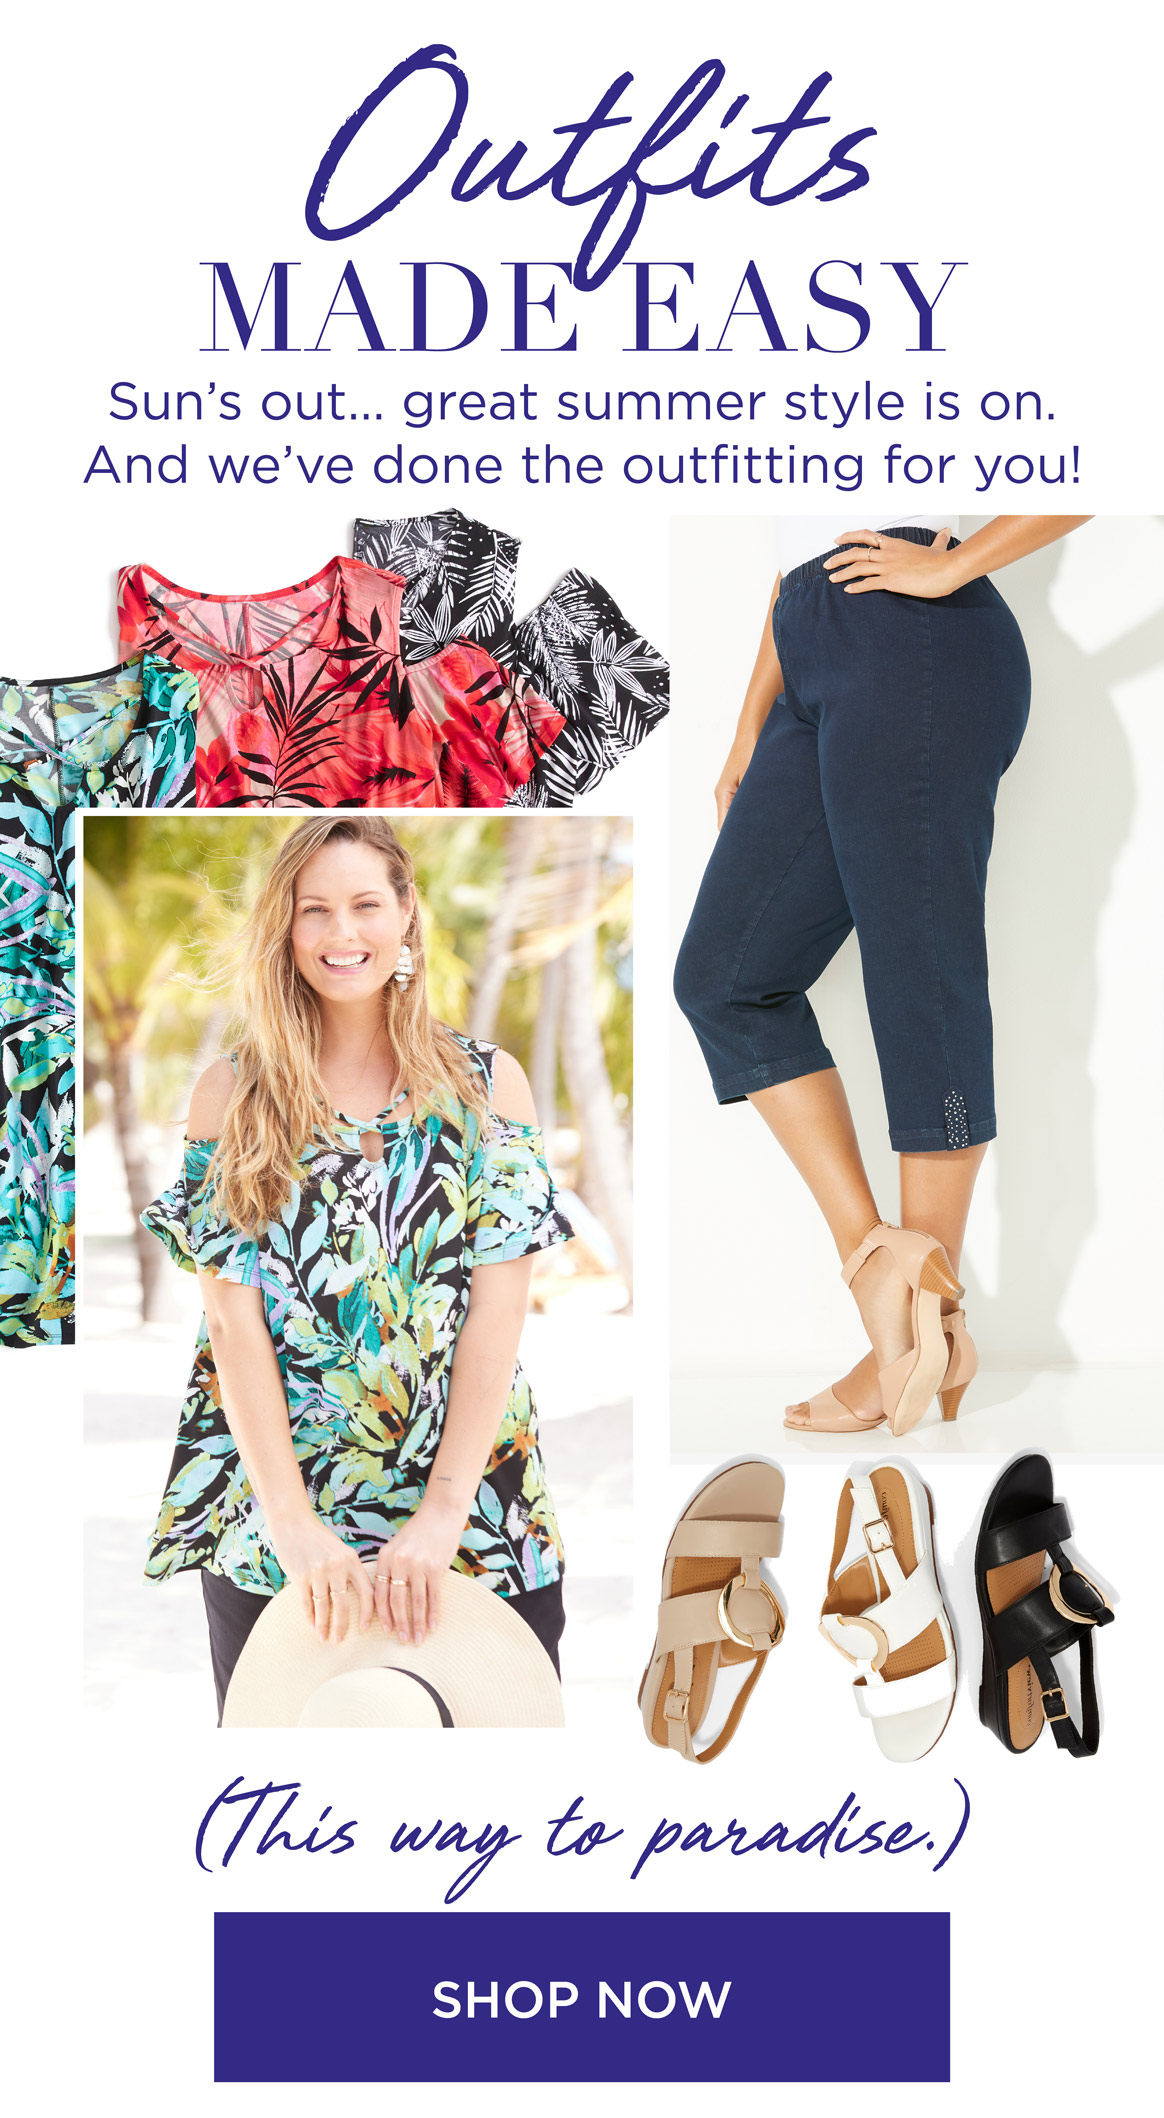 Outfits Made Easy - Sun's out... great summer style is on. And we've done the outfitting for you! (this way to paradise)